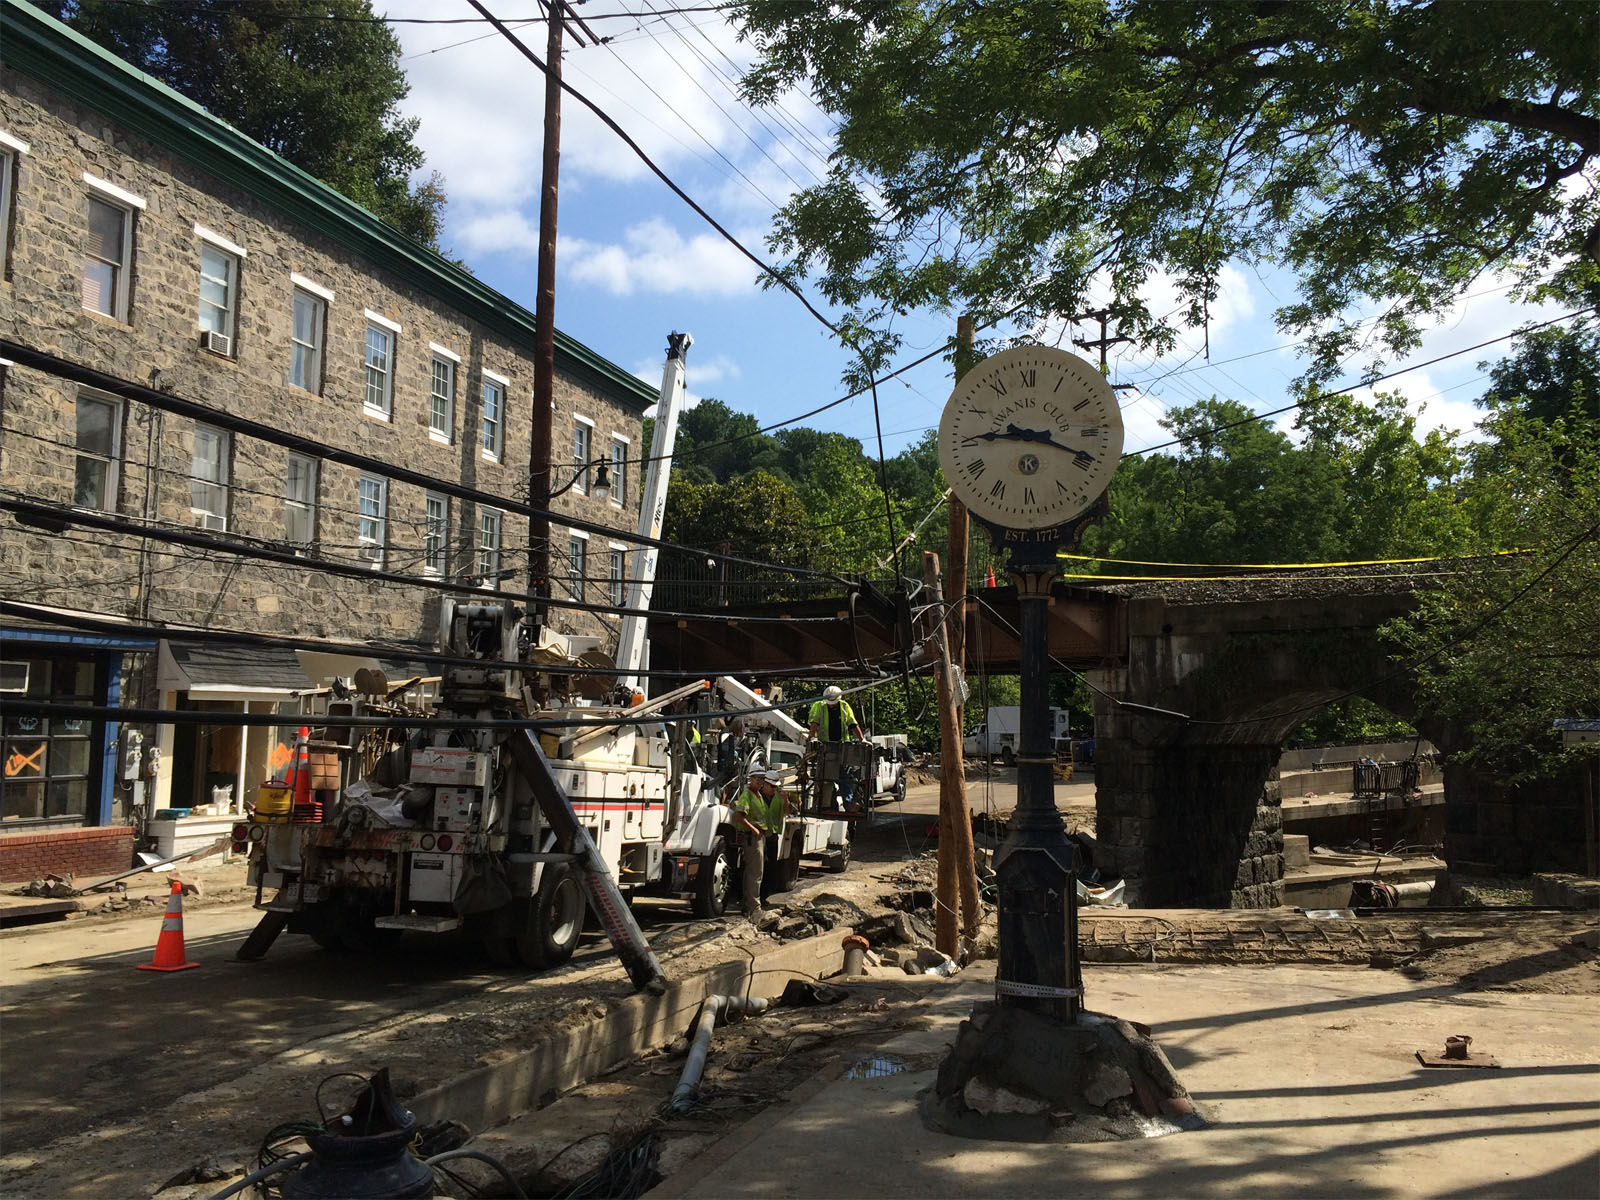 Scenes from the clean-up of Ellicott City after flash floods on July 30 ravaged the city's historic Main Street. (WTOP/Nick Iannelli)